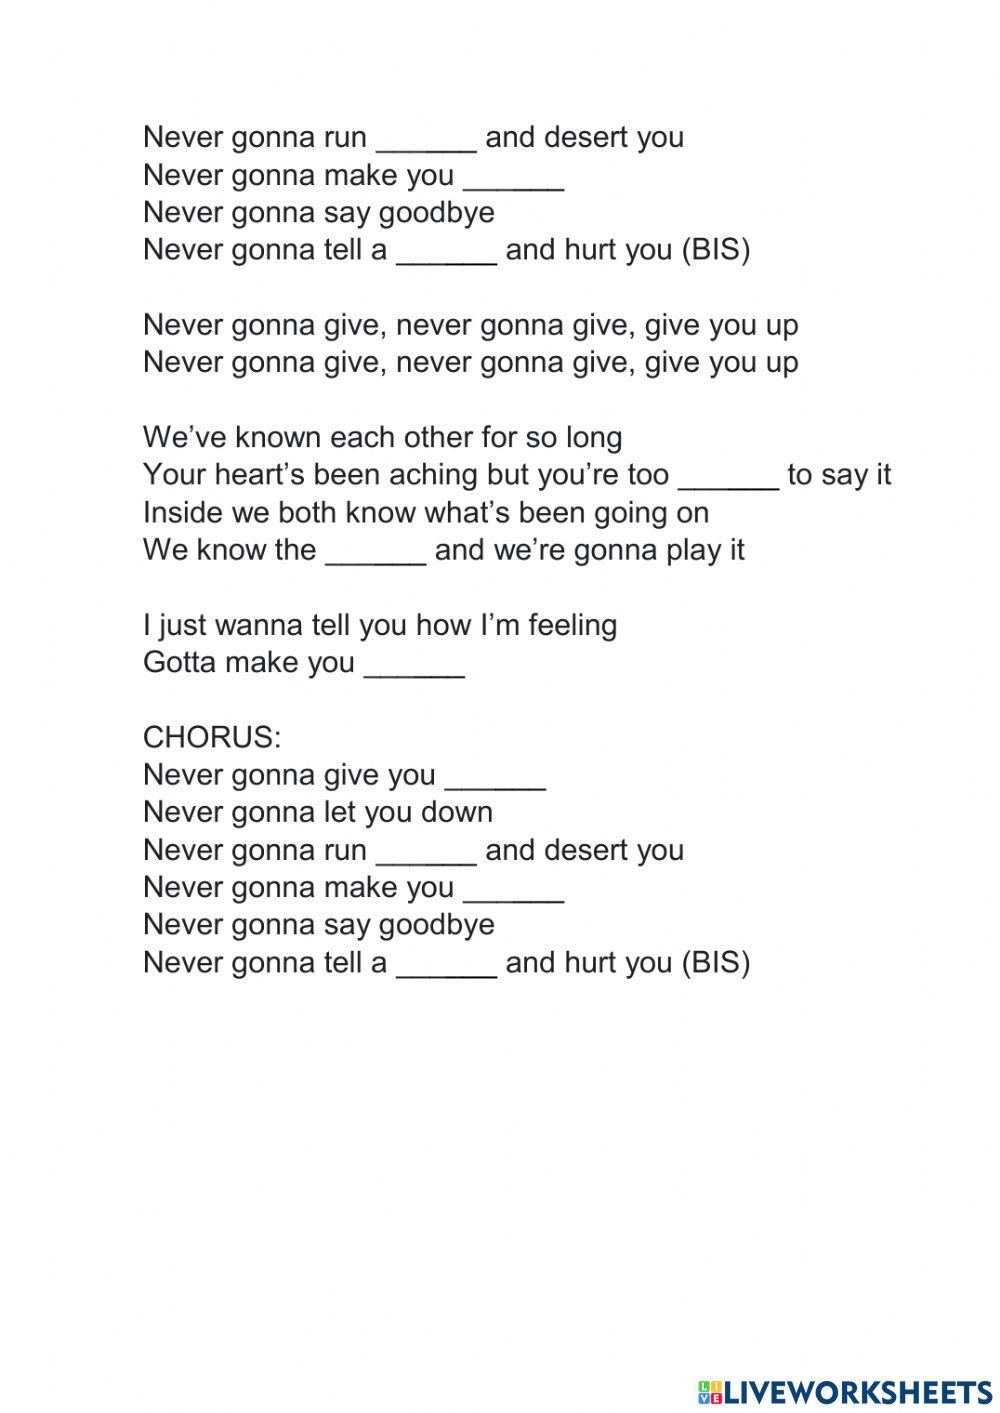 Sing a song: never gonna give you up